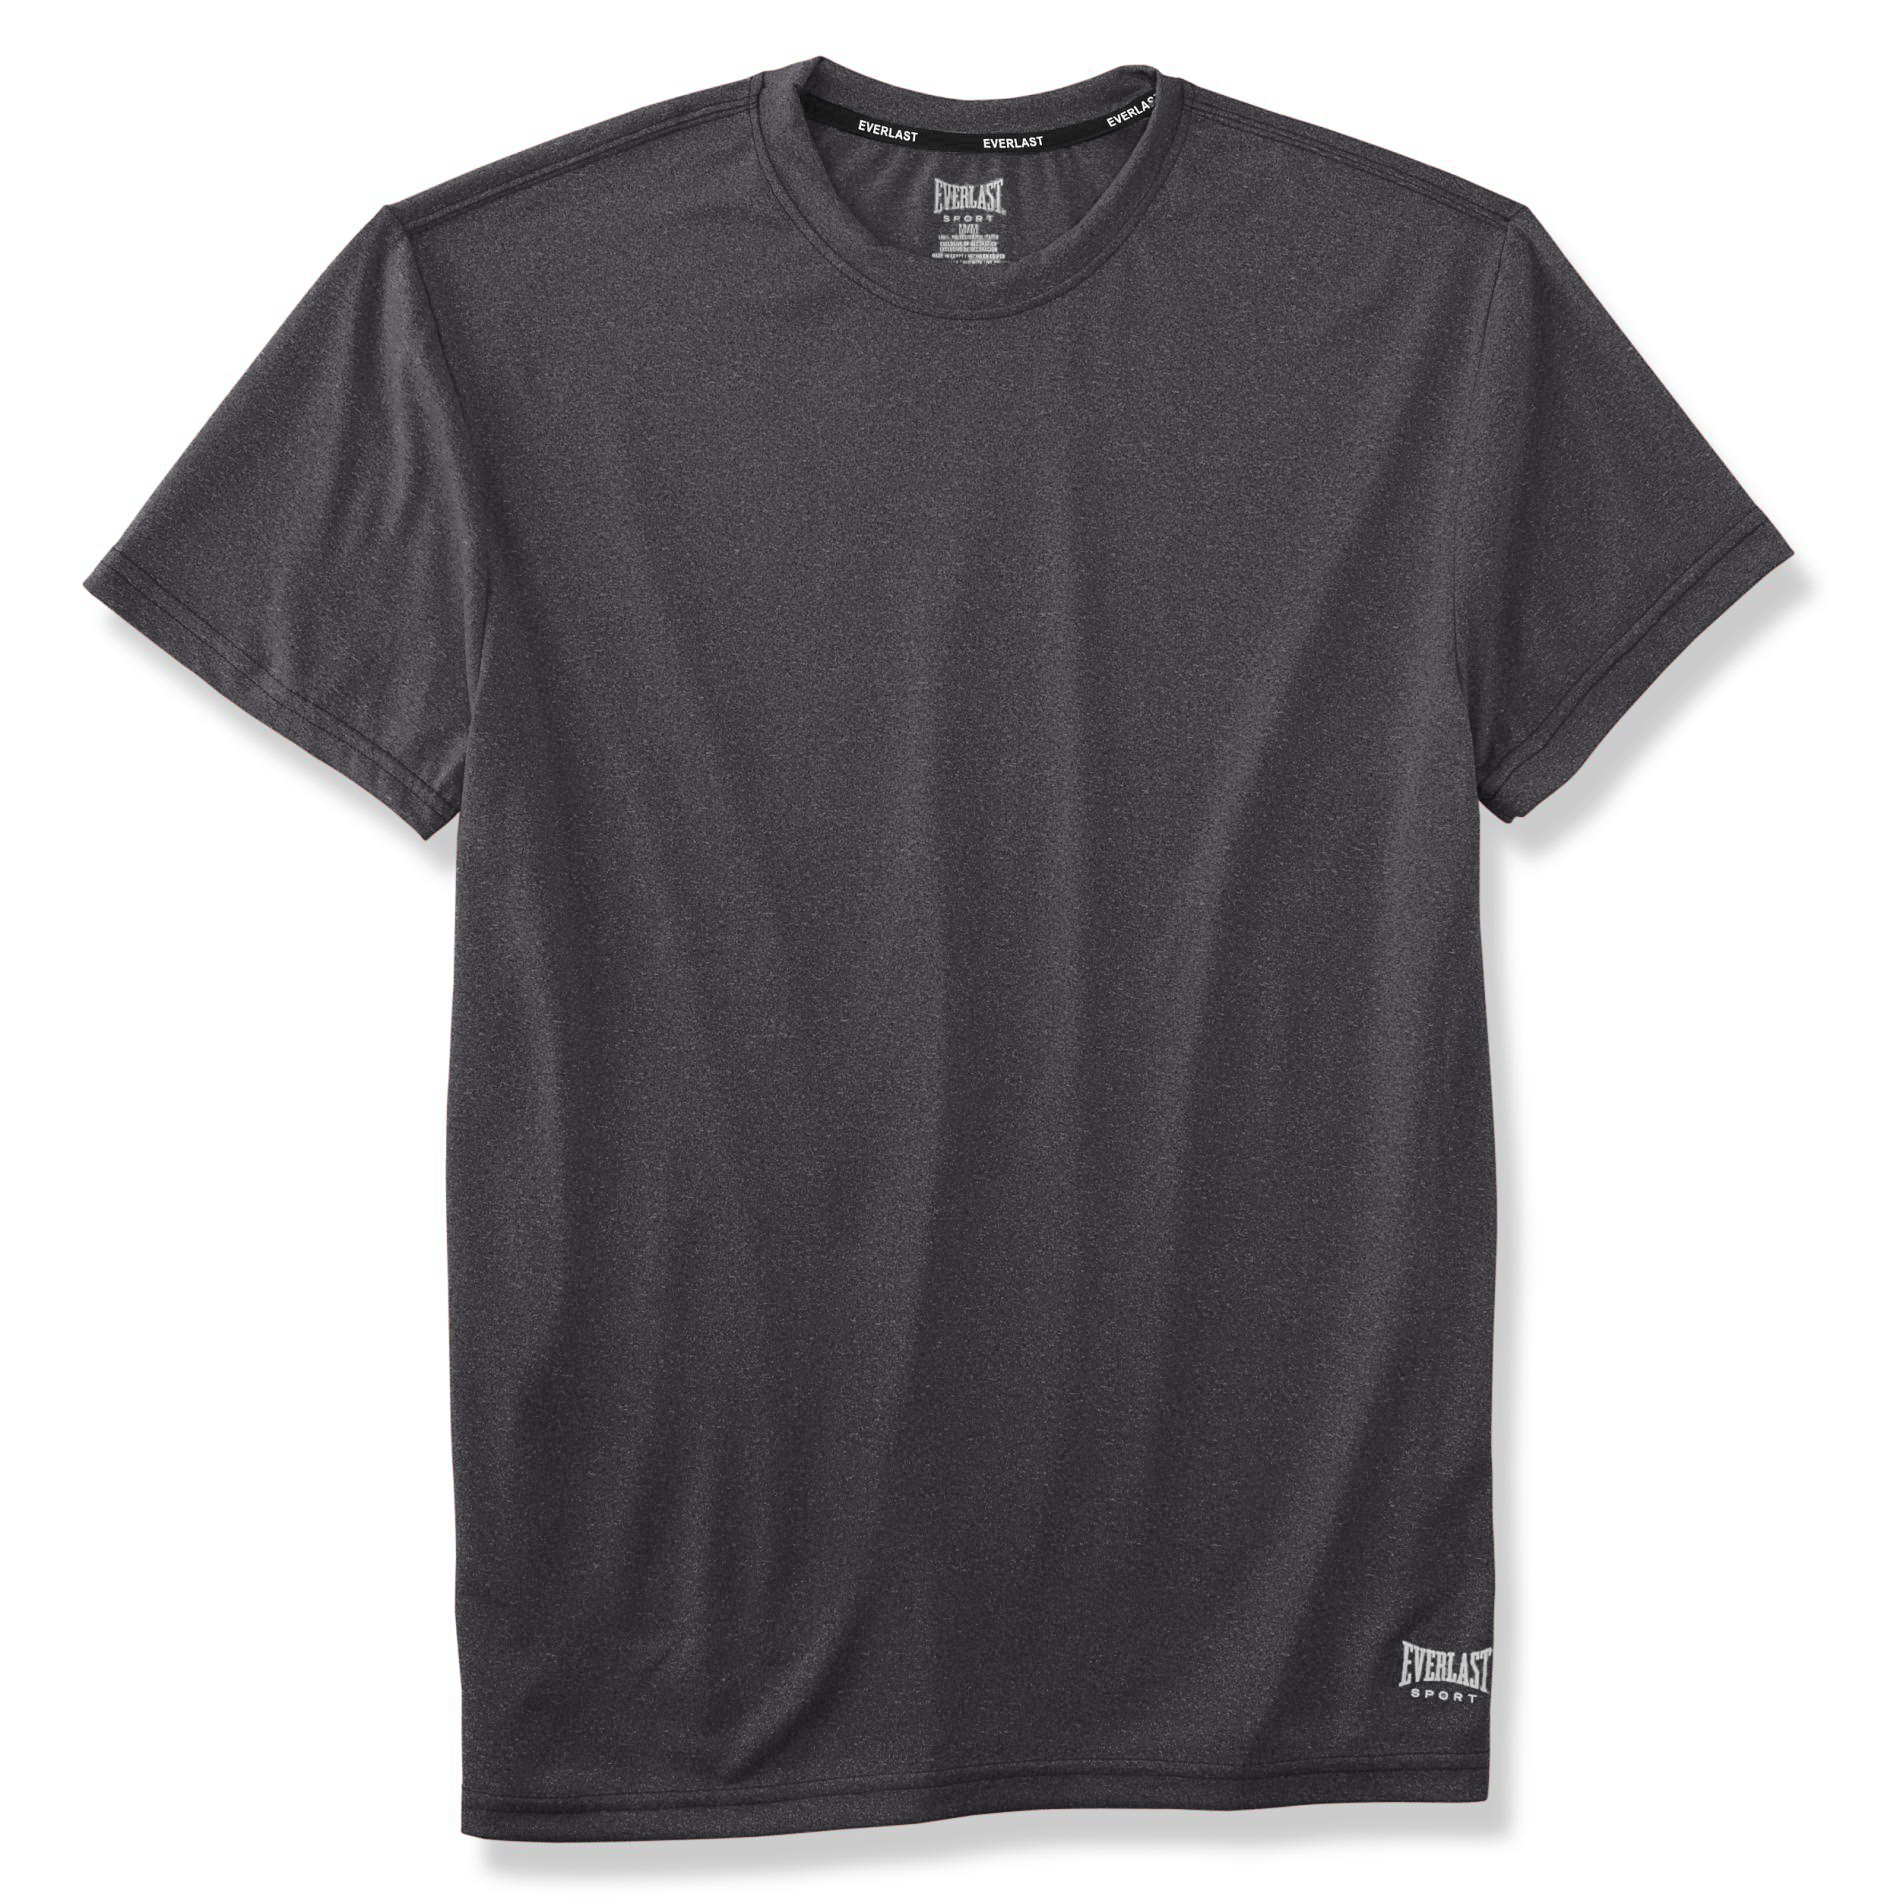 Everlast® Sport Men's Big and Tall Athletic T-Shirt - Heathered | Shop ...